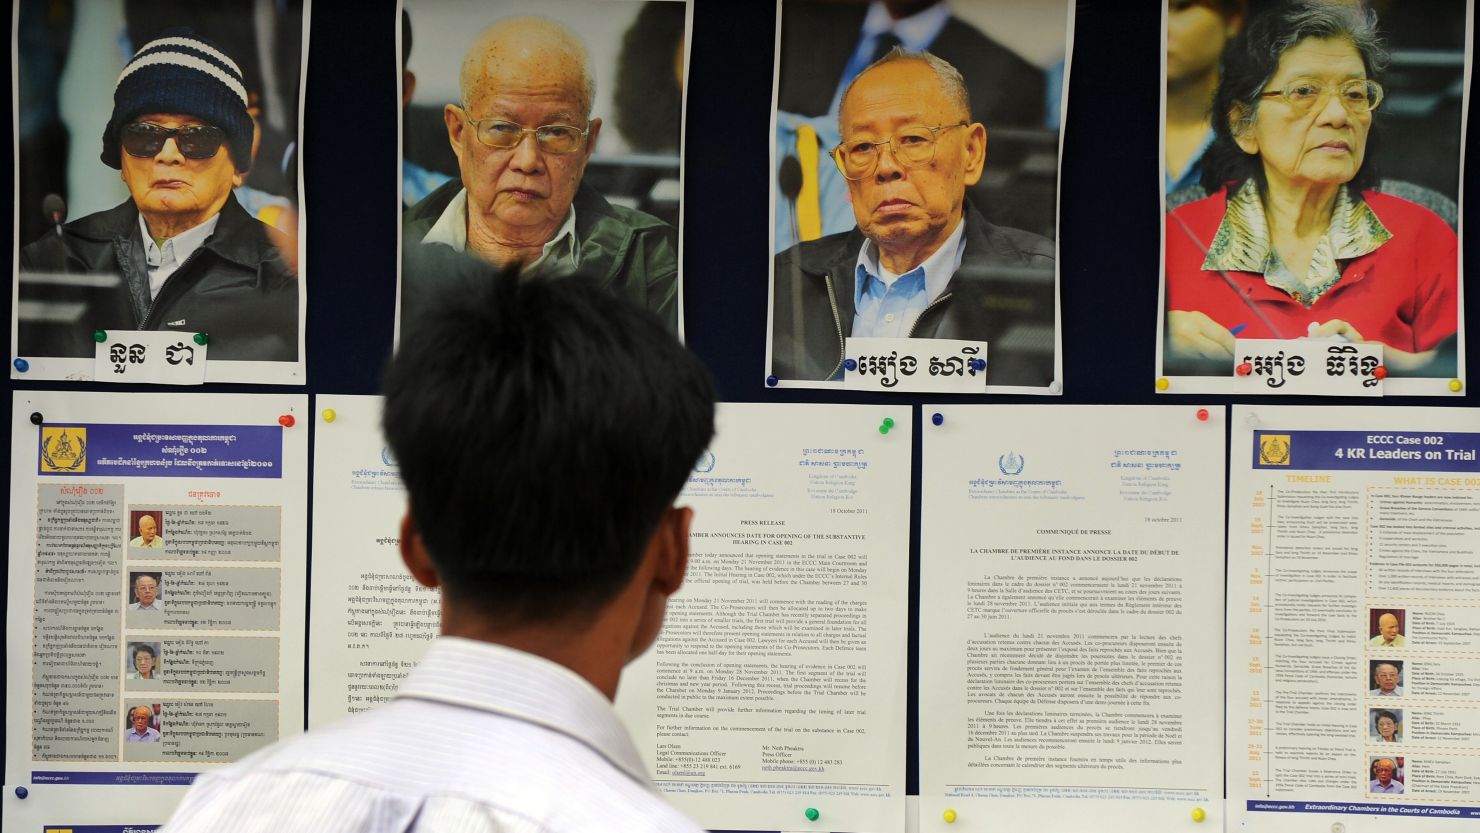 A Cambodian man looks at pictures of former Khmer Rouge leaders, three of whom are on trial.